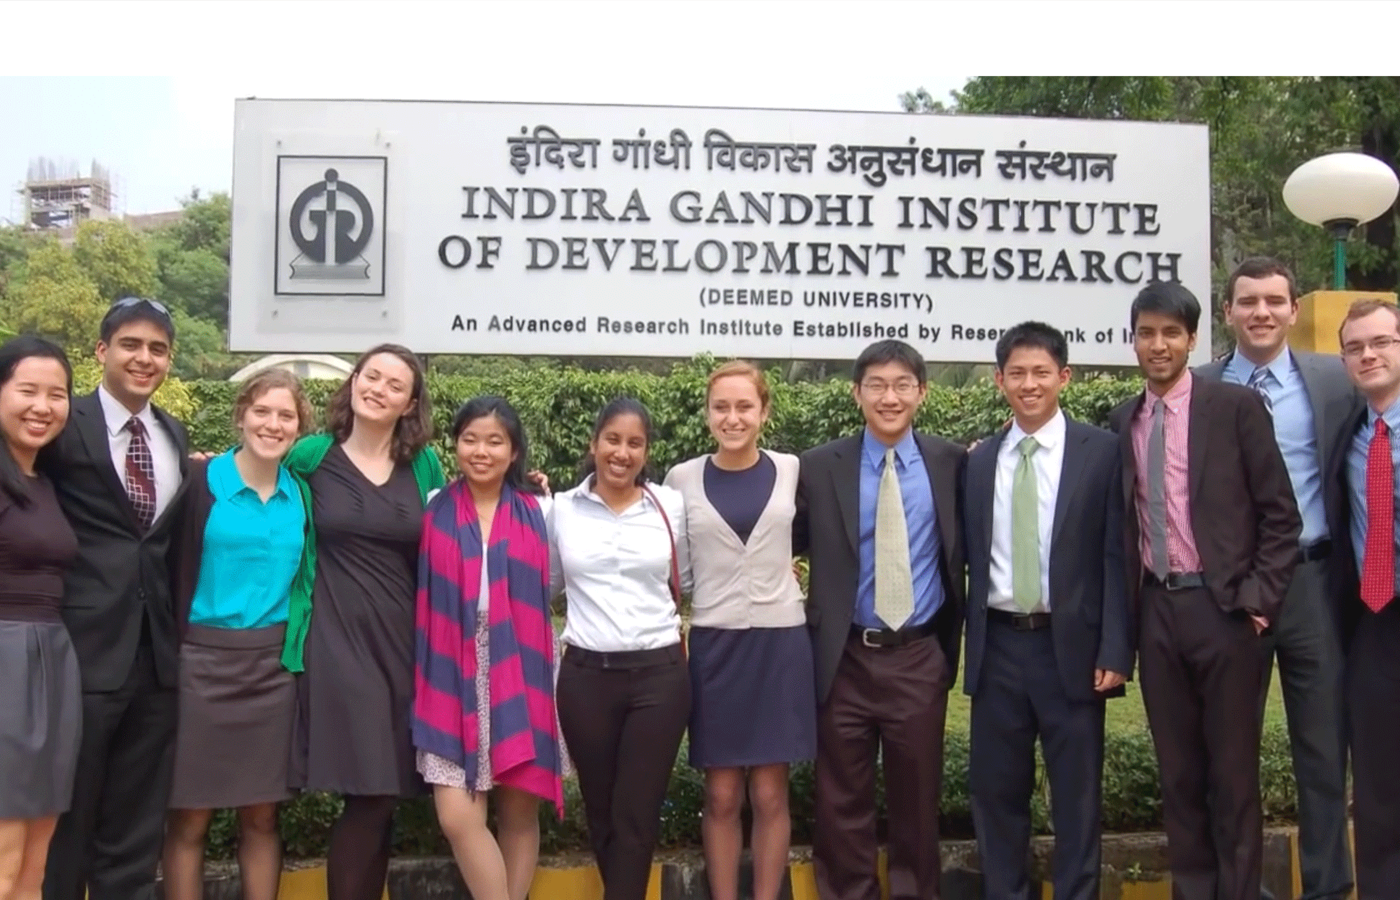 Students posing in front the Indira Gandhi Institute sign while studying abroad